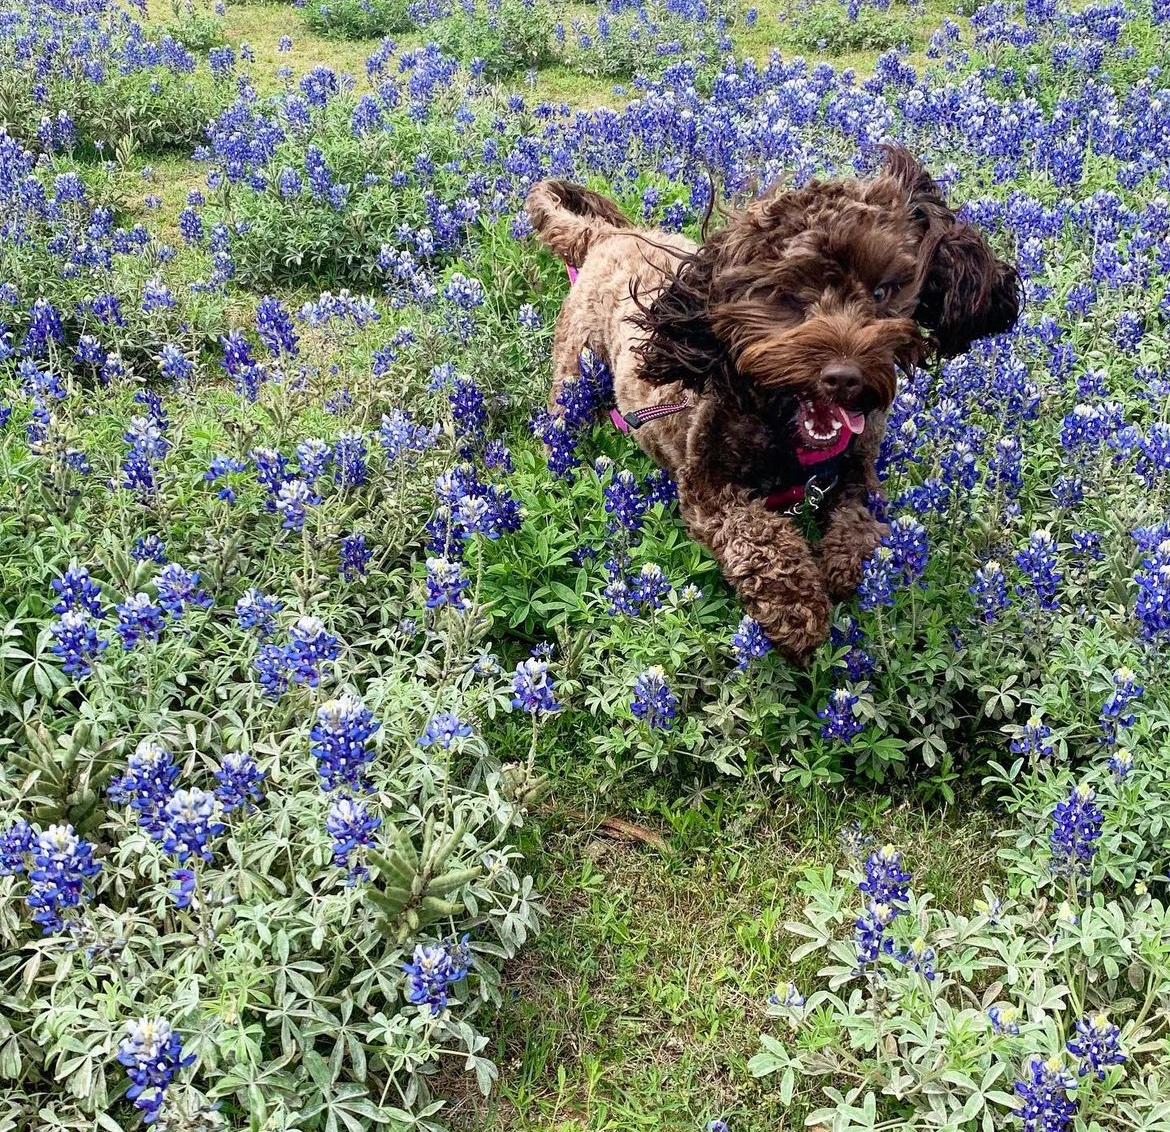 took my dog to those bluebonnet fields in texas once & these are the photos i took right before she crashed an influencer’s photoshoot as one does in NATURE